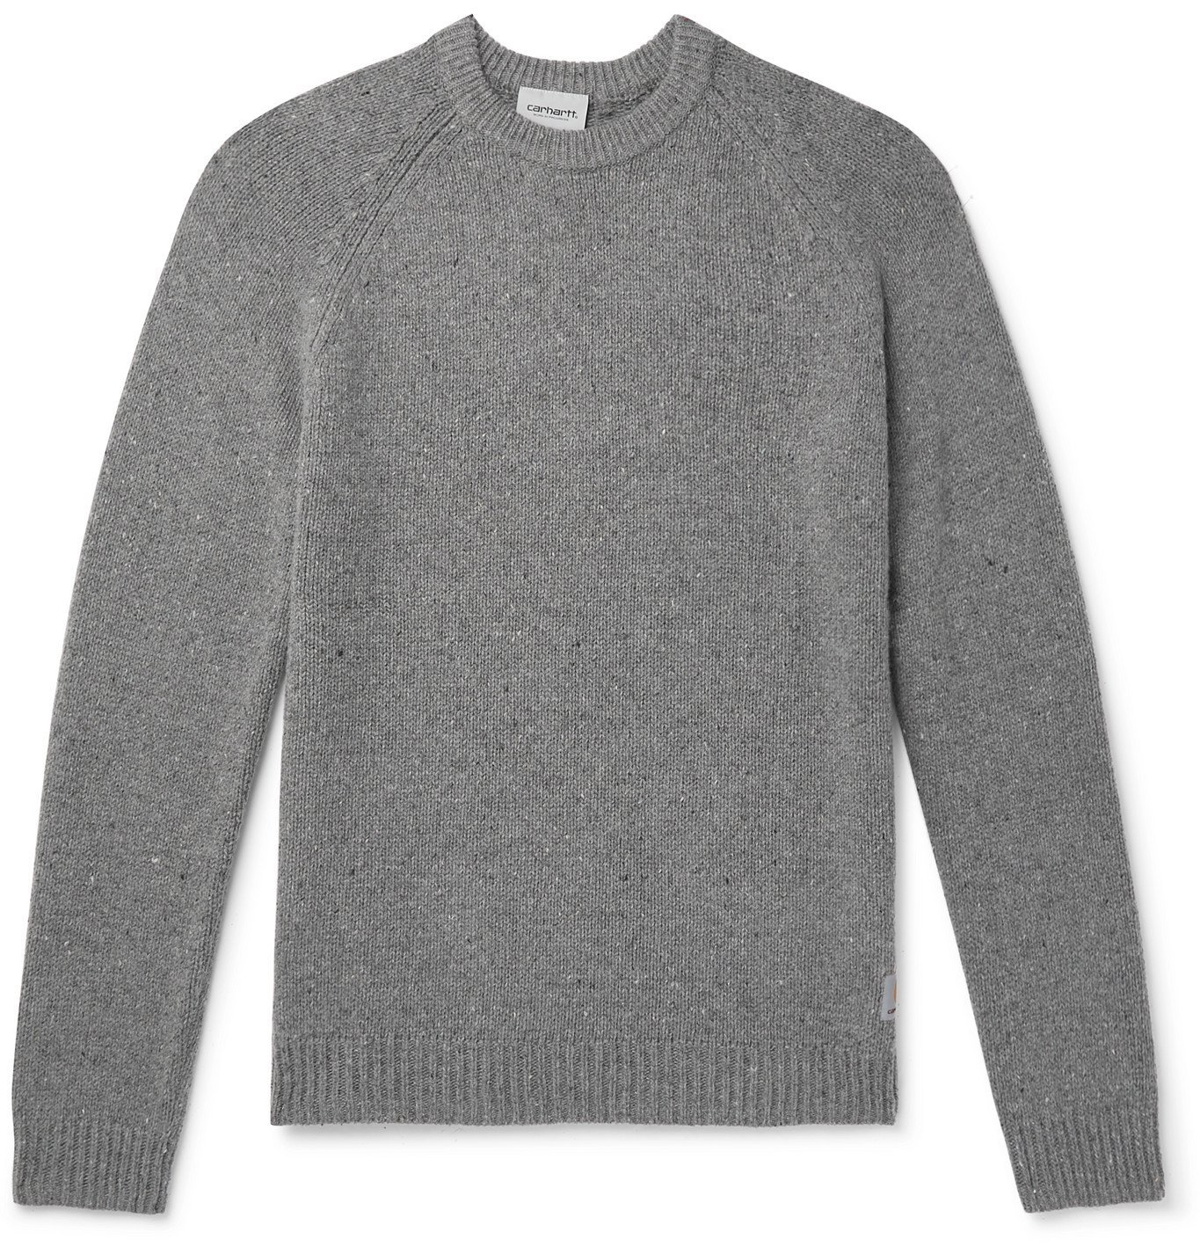 CARHARTT WIP - Anglistic Mélange Wool-Blend Sweater - Gray WIP